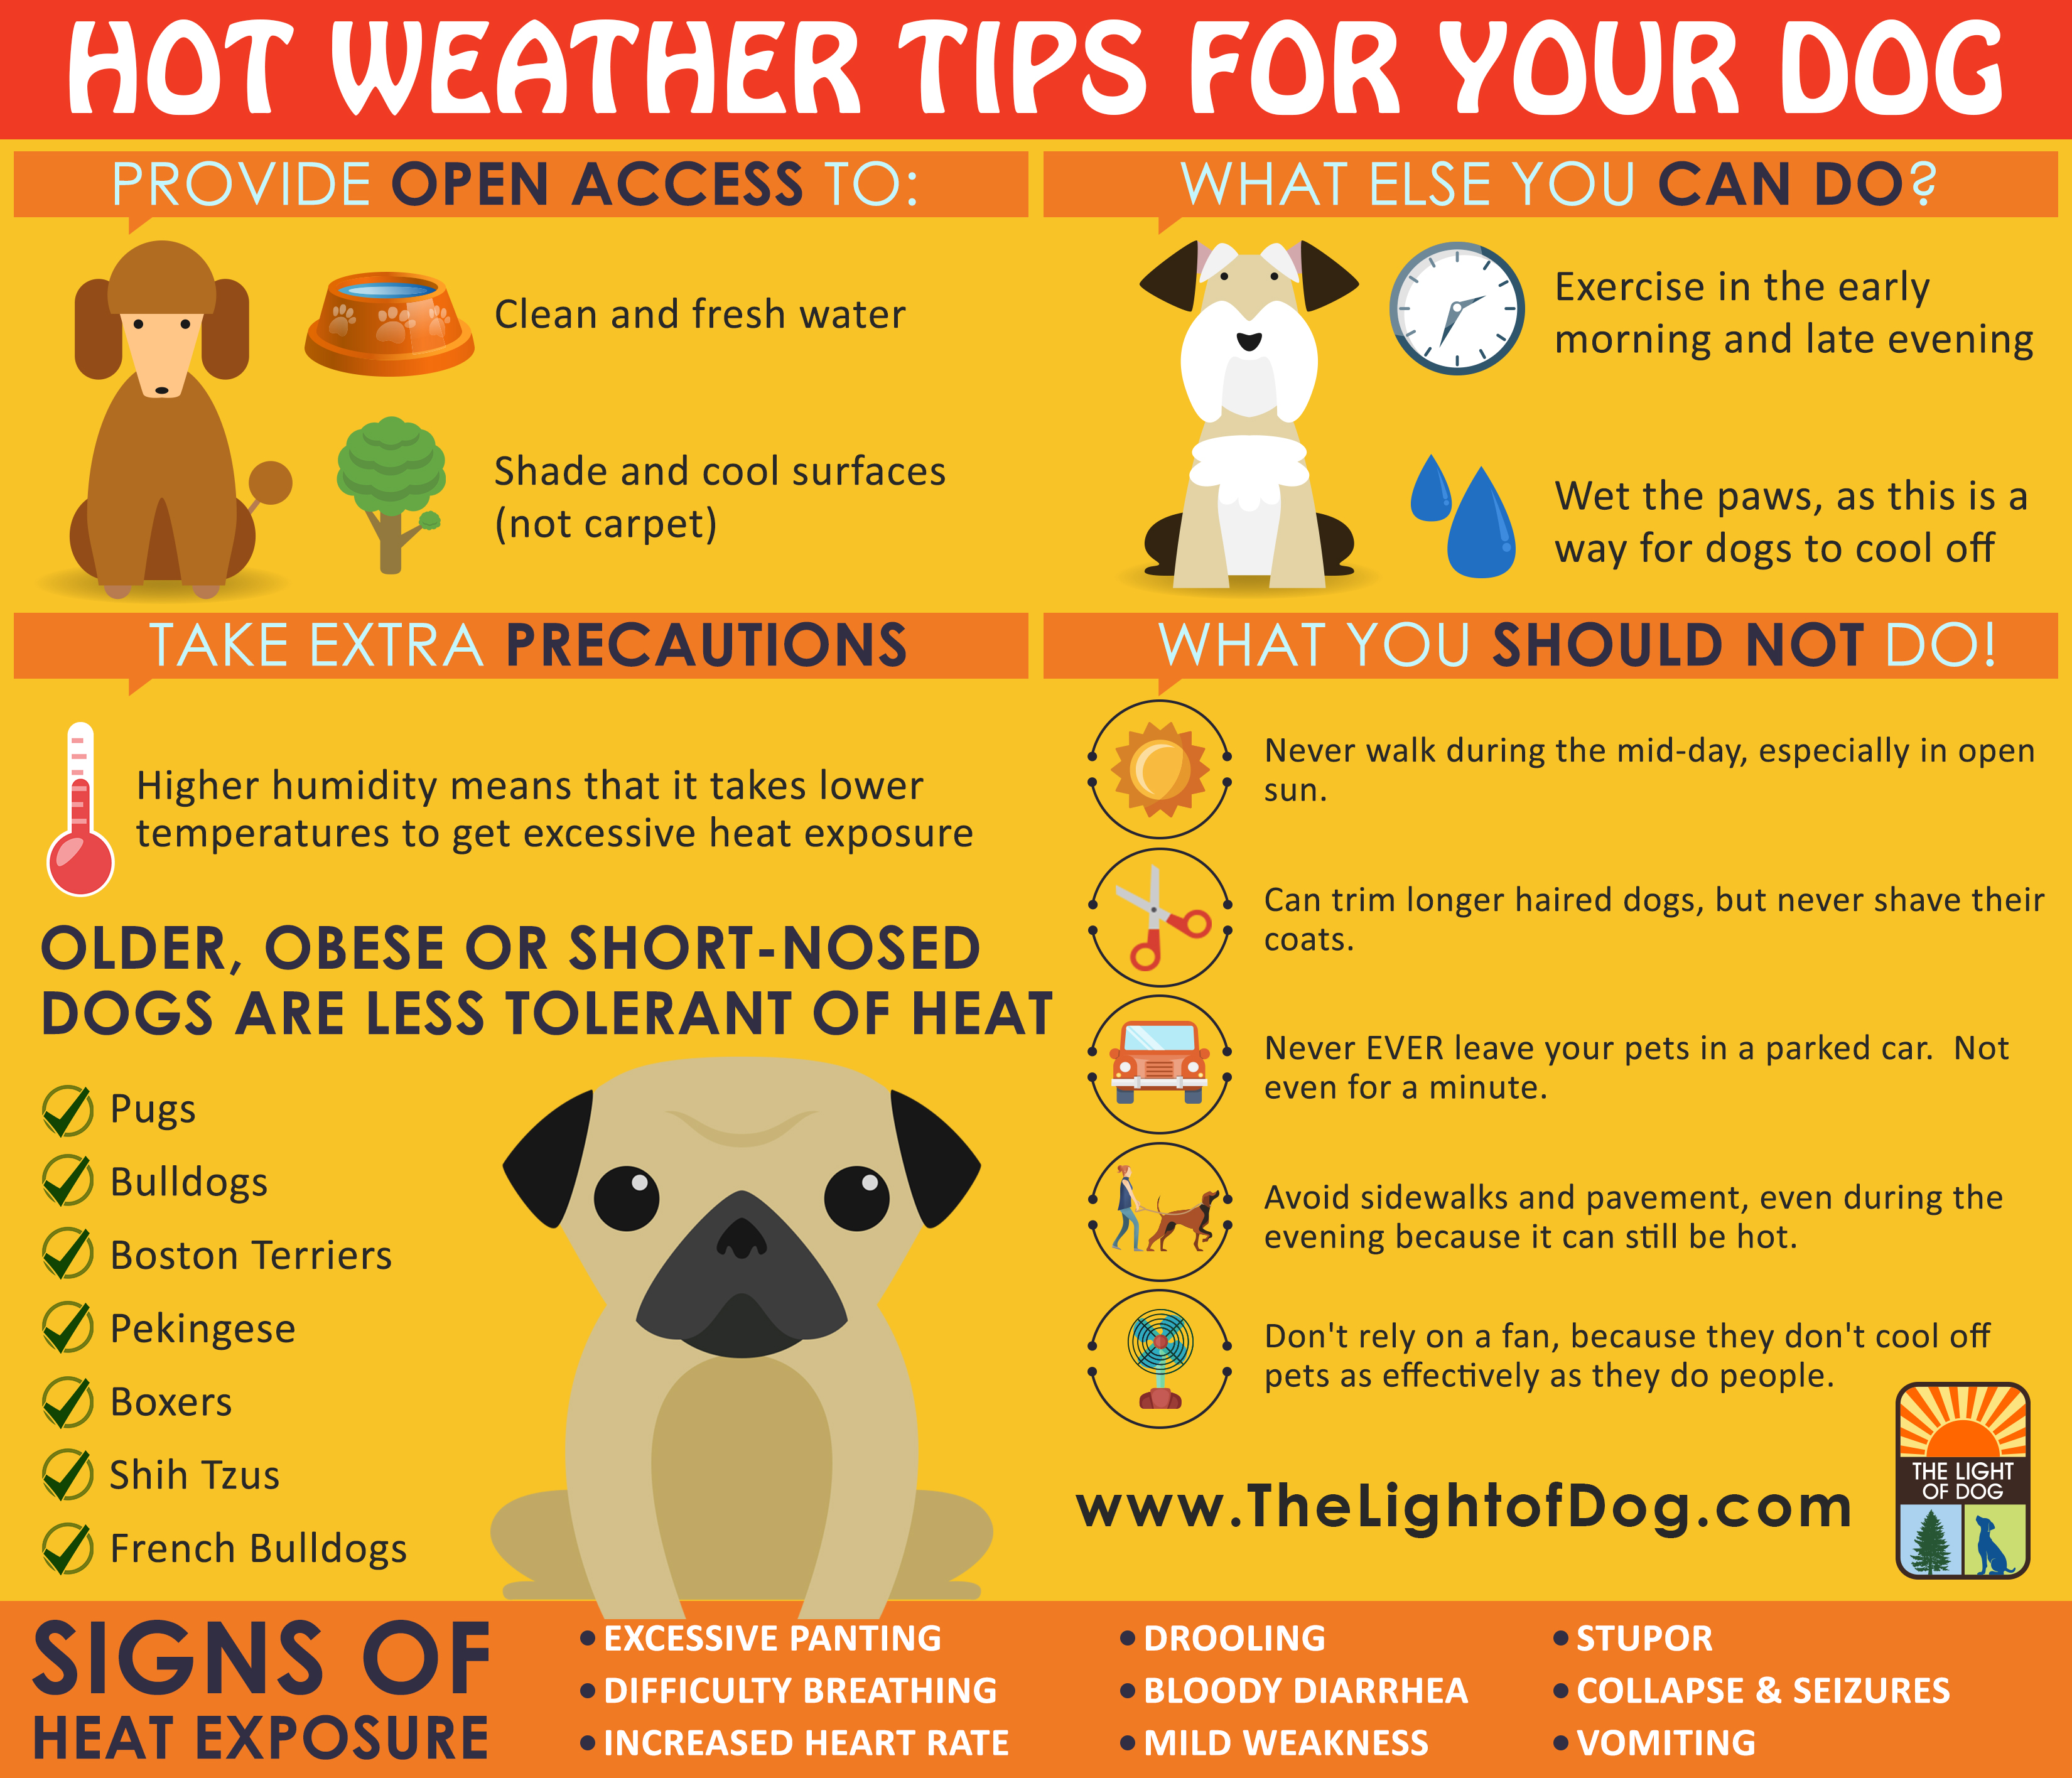 Hot weather tips for your dog - The Light Of Dog